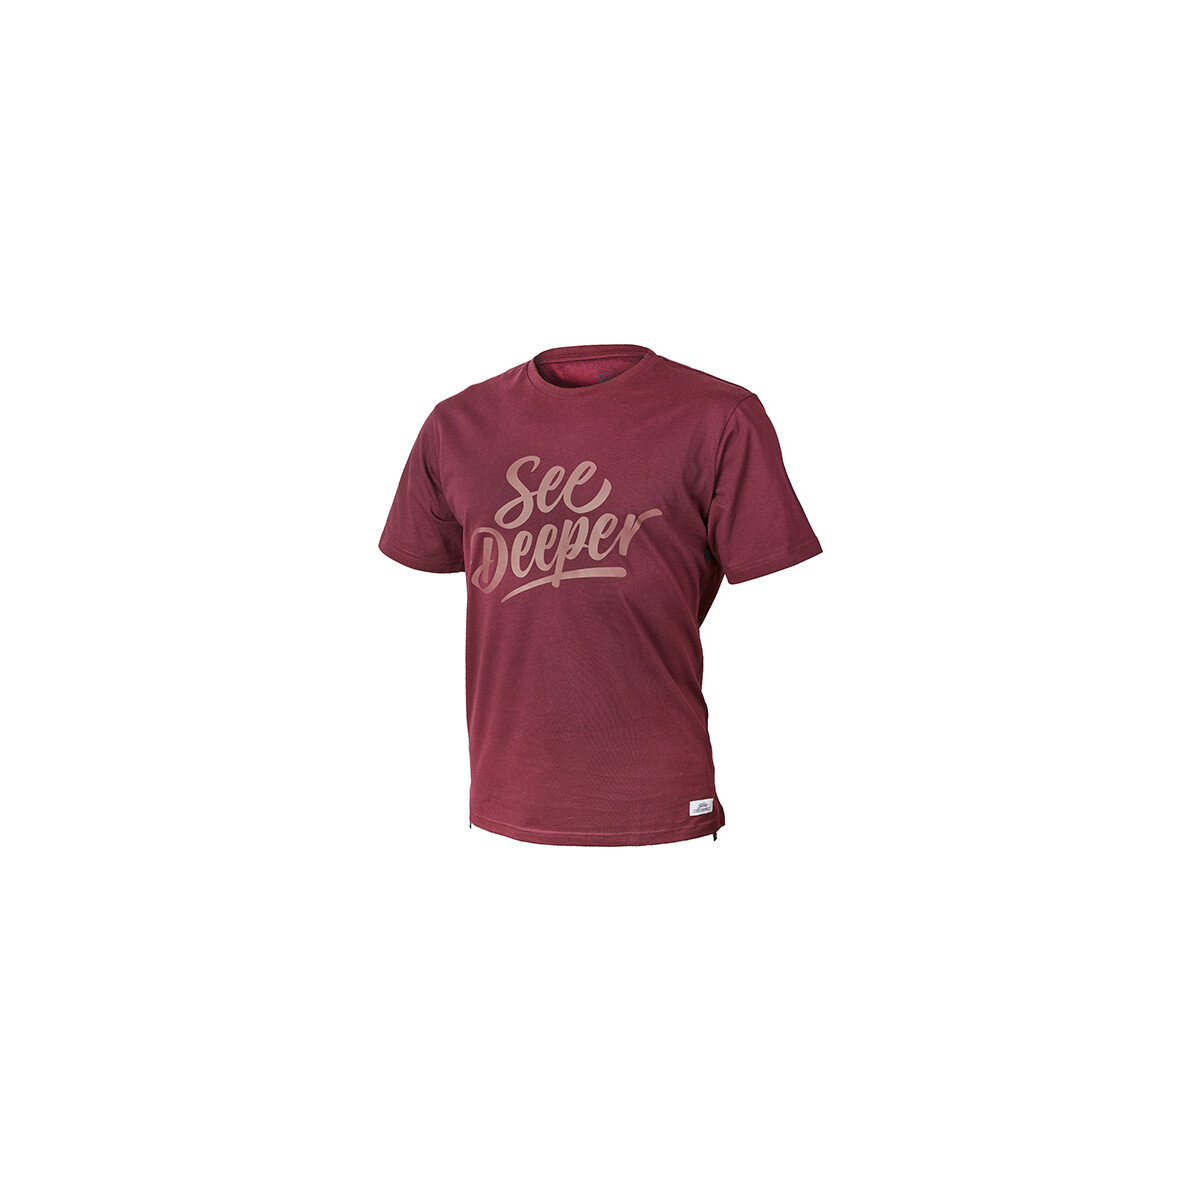 Fortis T-Shirt See Deeper Maroon